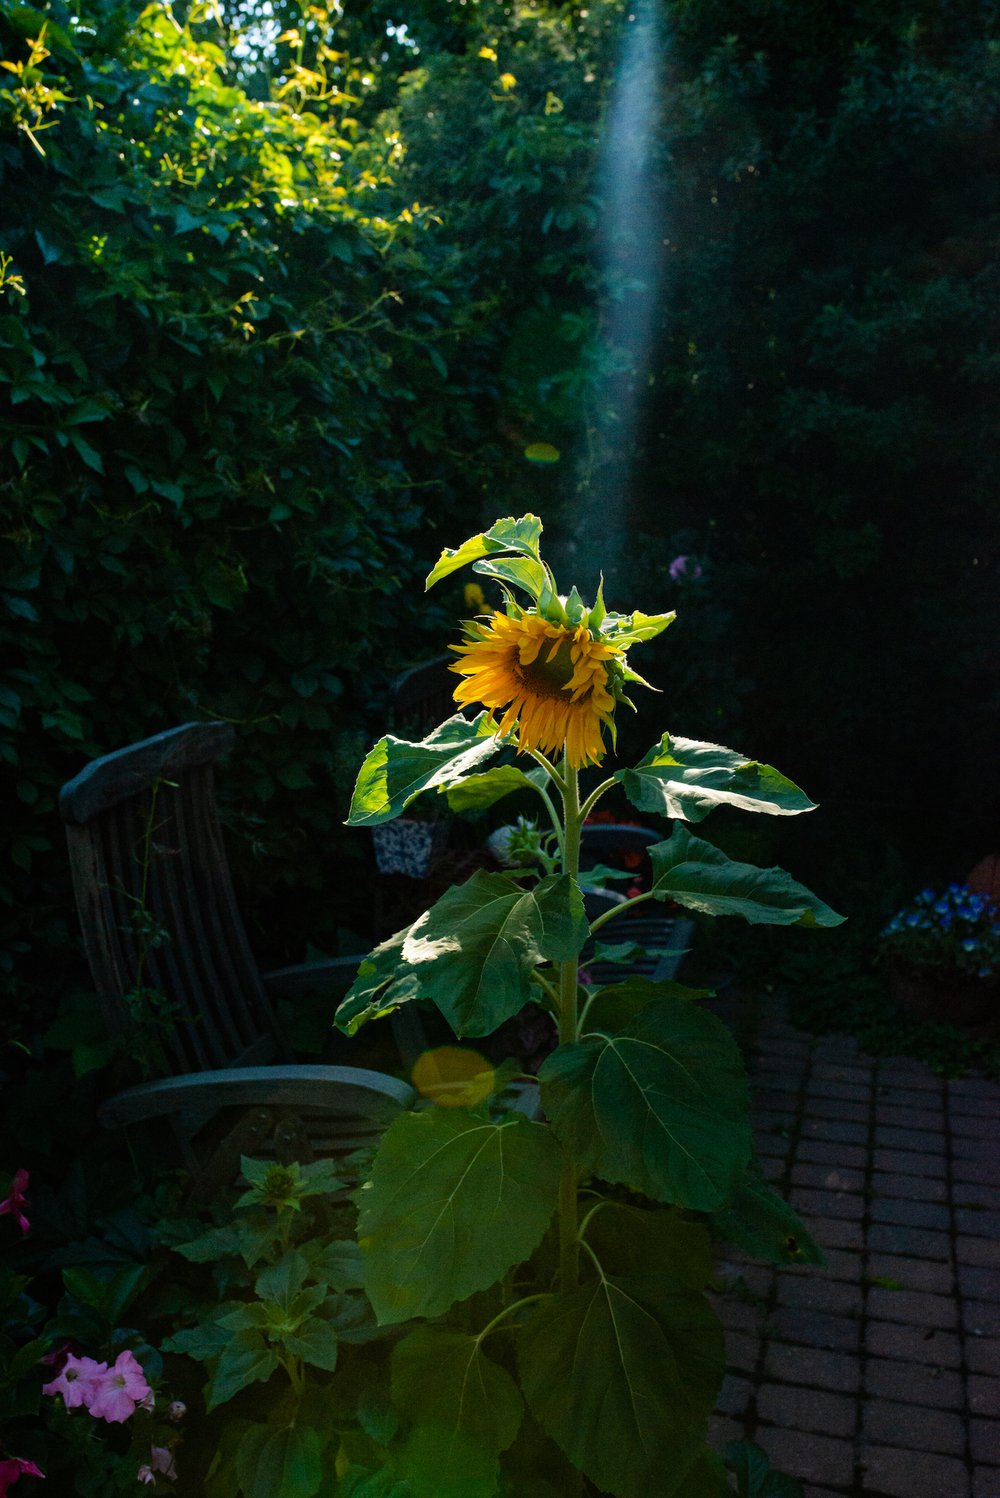 Sunflower in a beam of sunlight in an outdoor setting